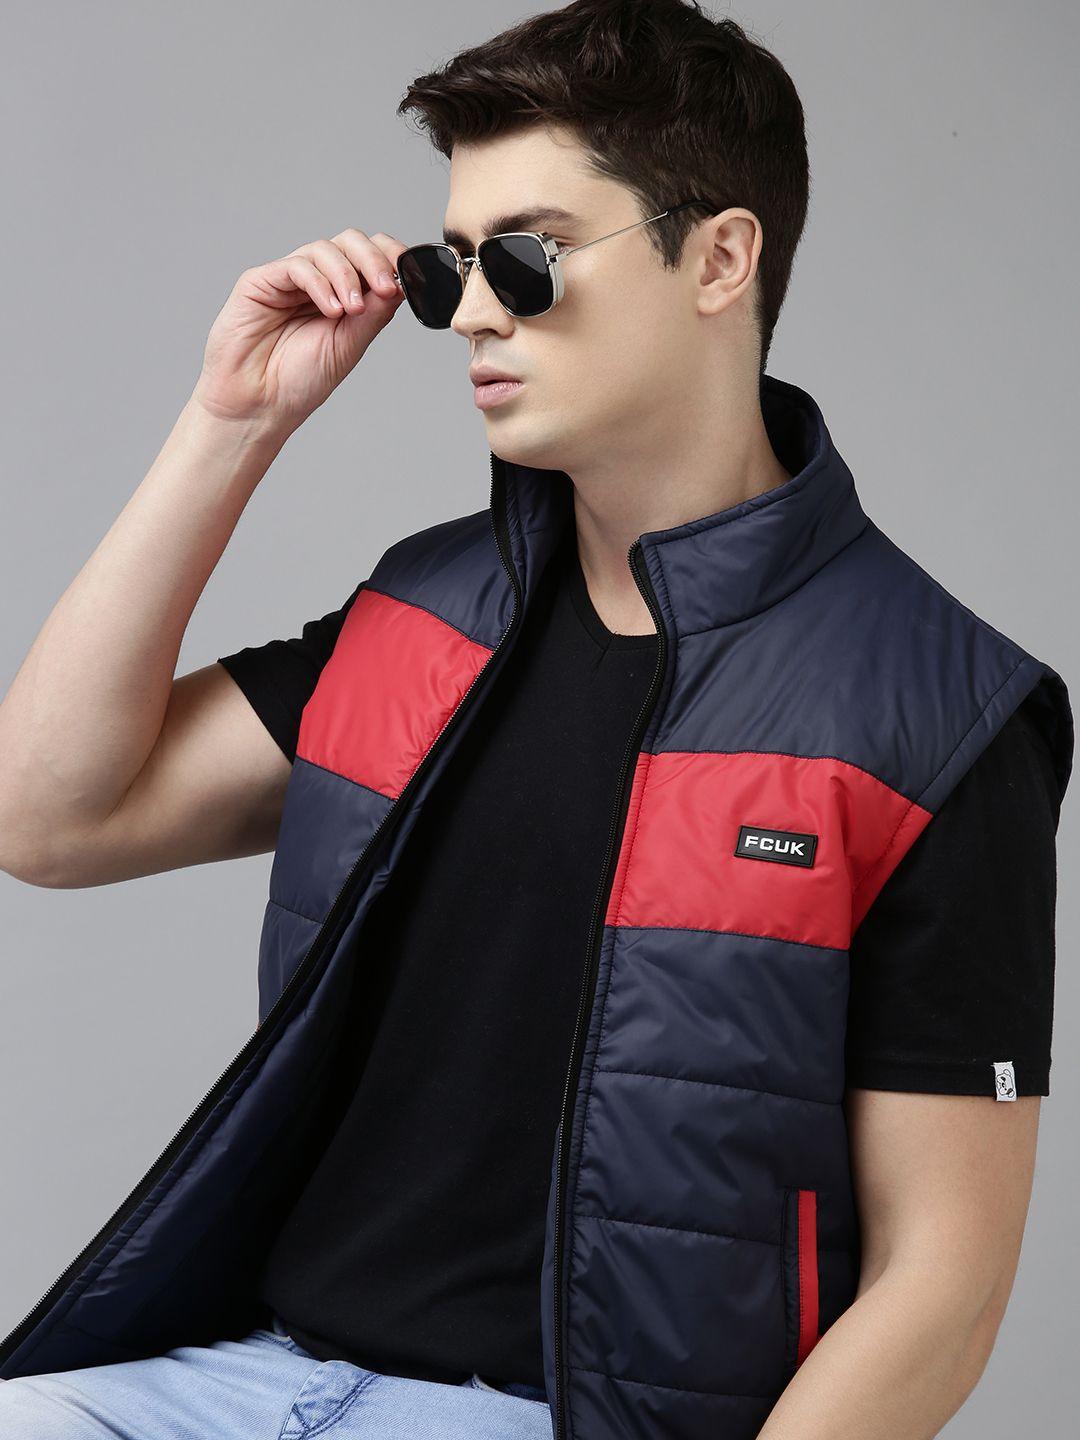 french connection men navy blue & red colourblocked gilet puffer jacket